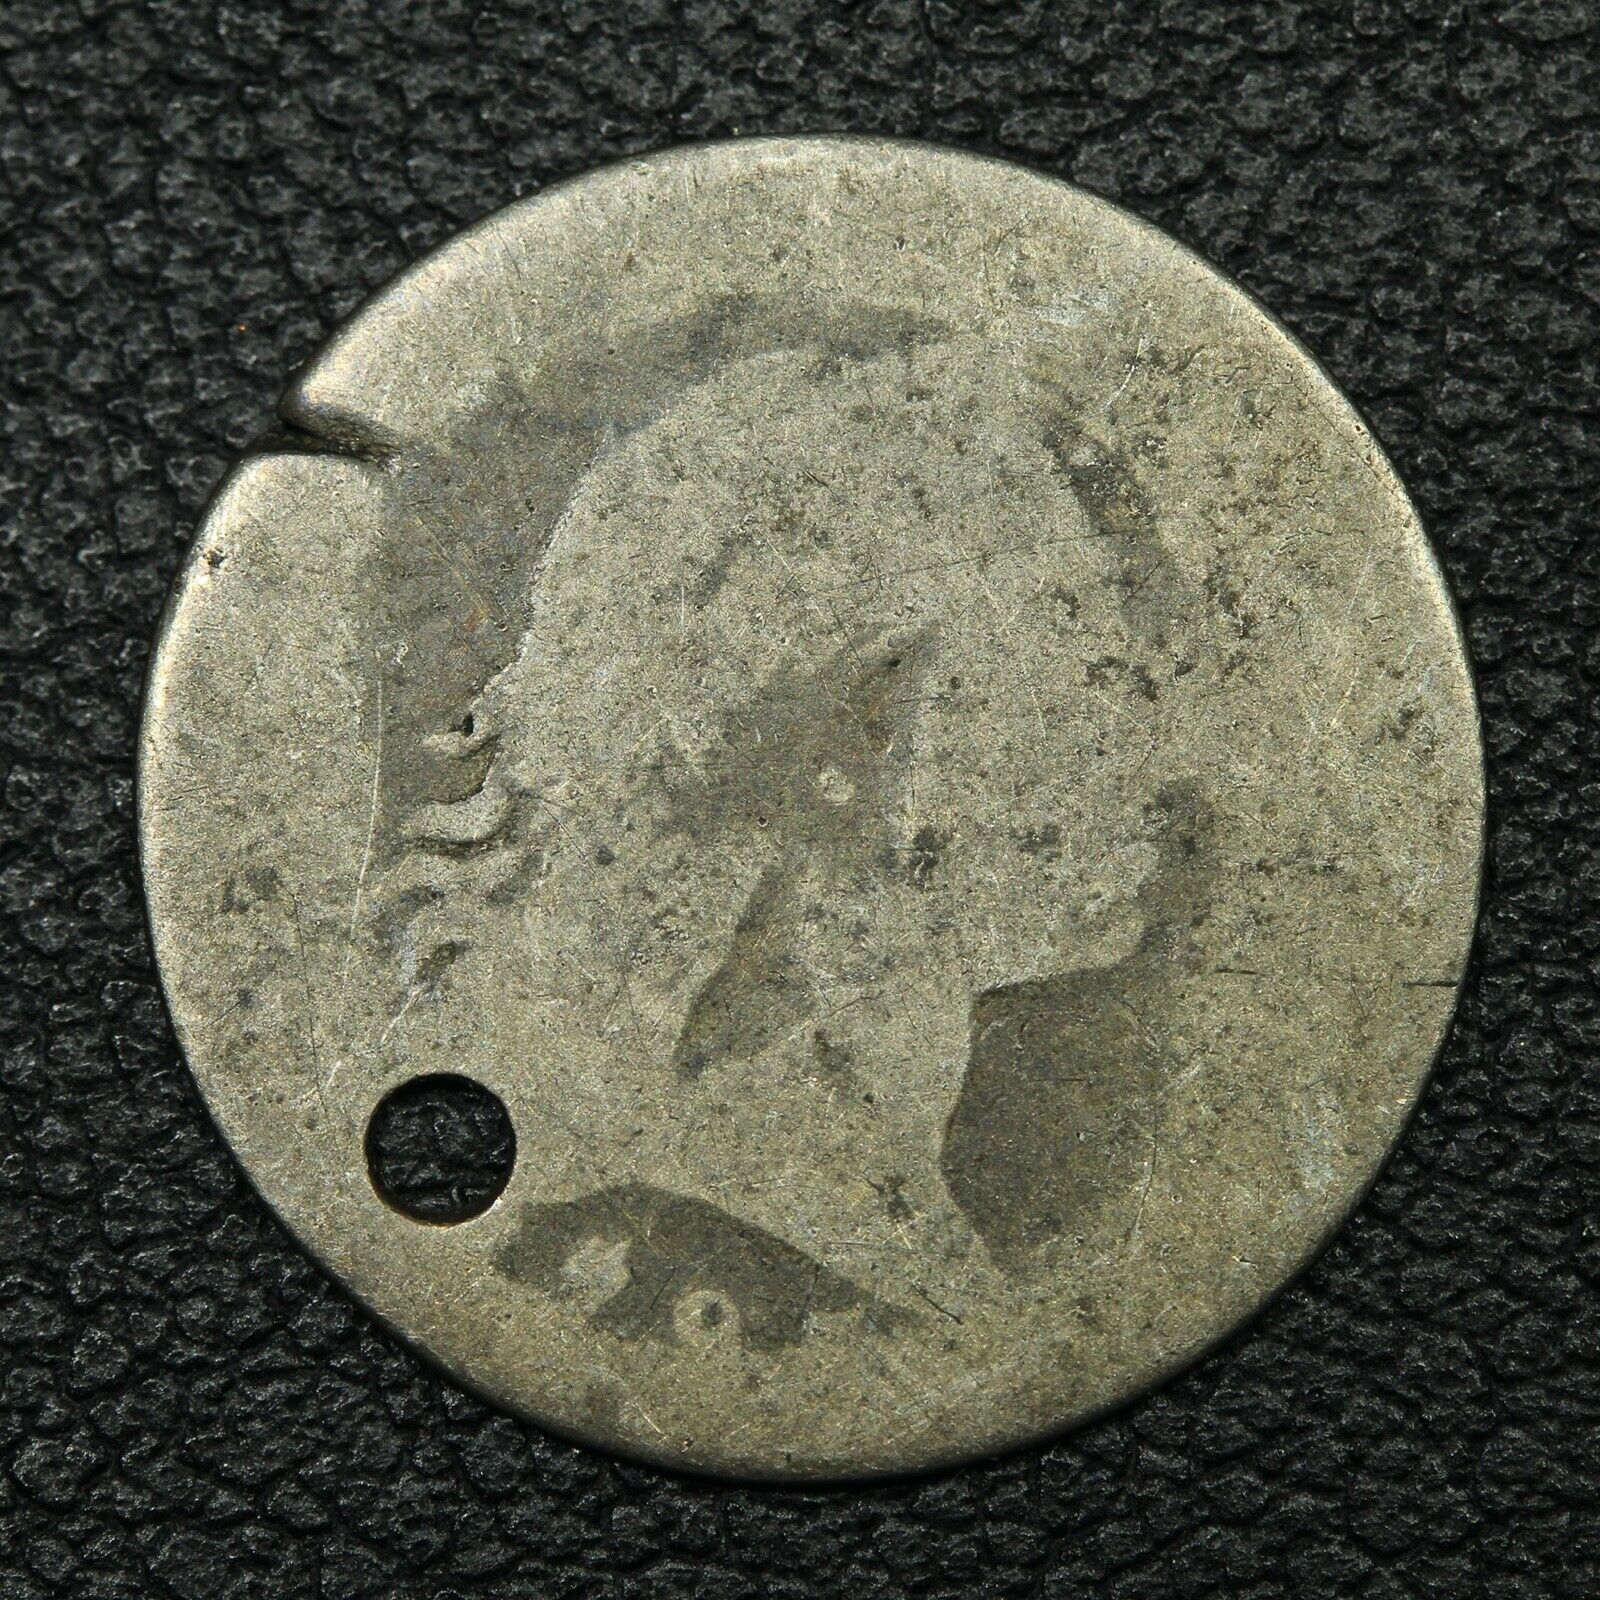 1795 Flowing Hair Silver Half Dime - Holed & Damaged